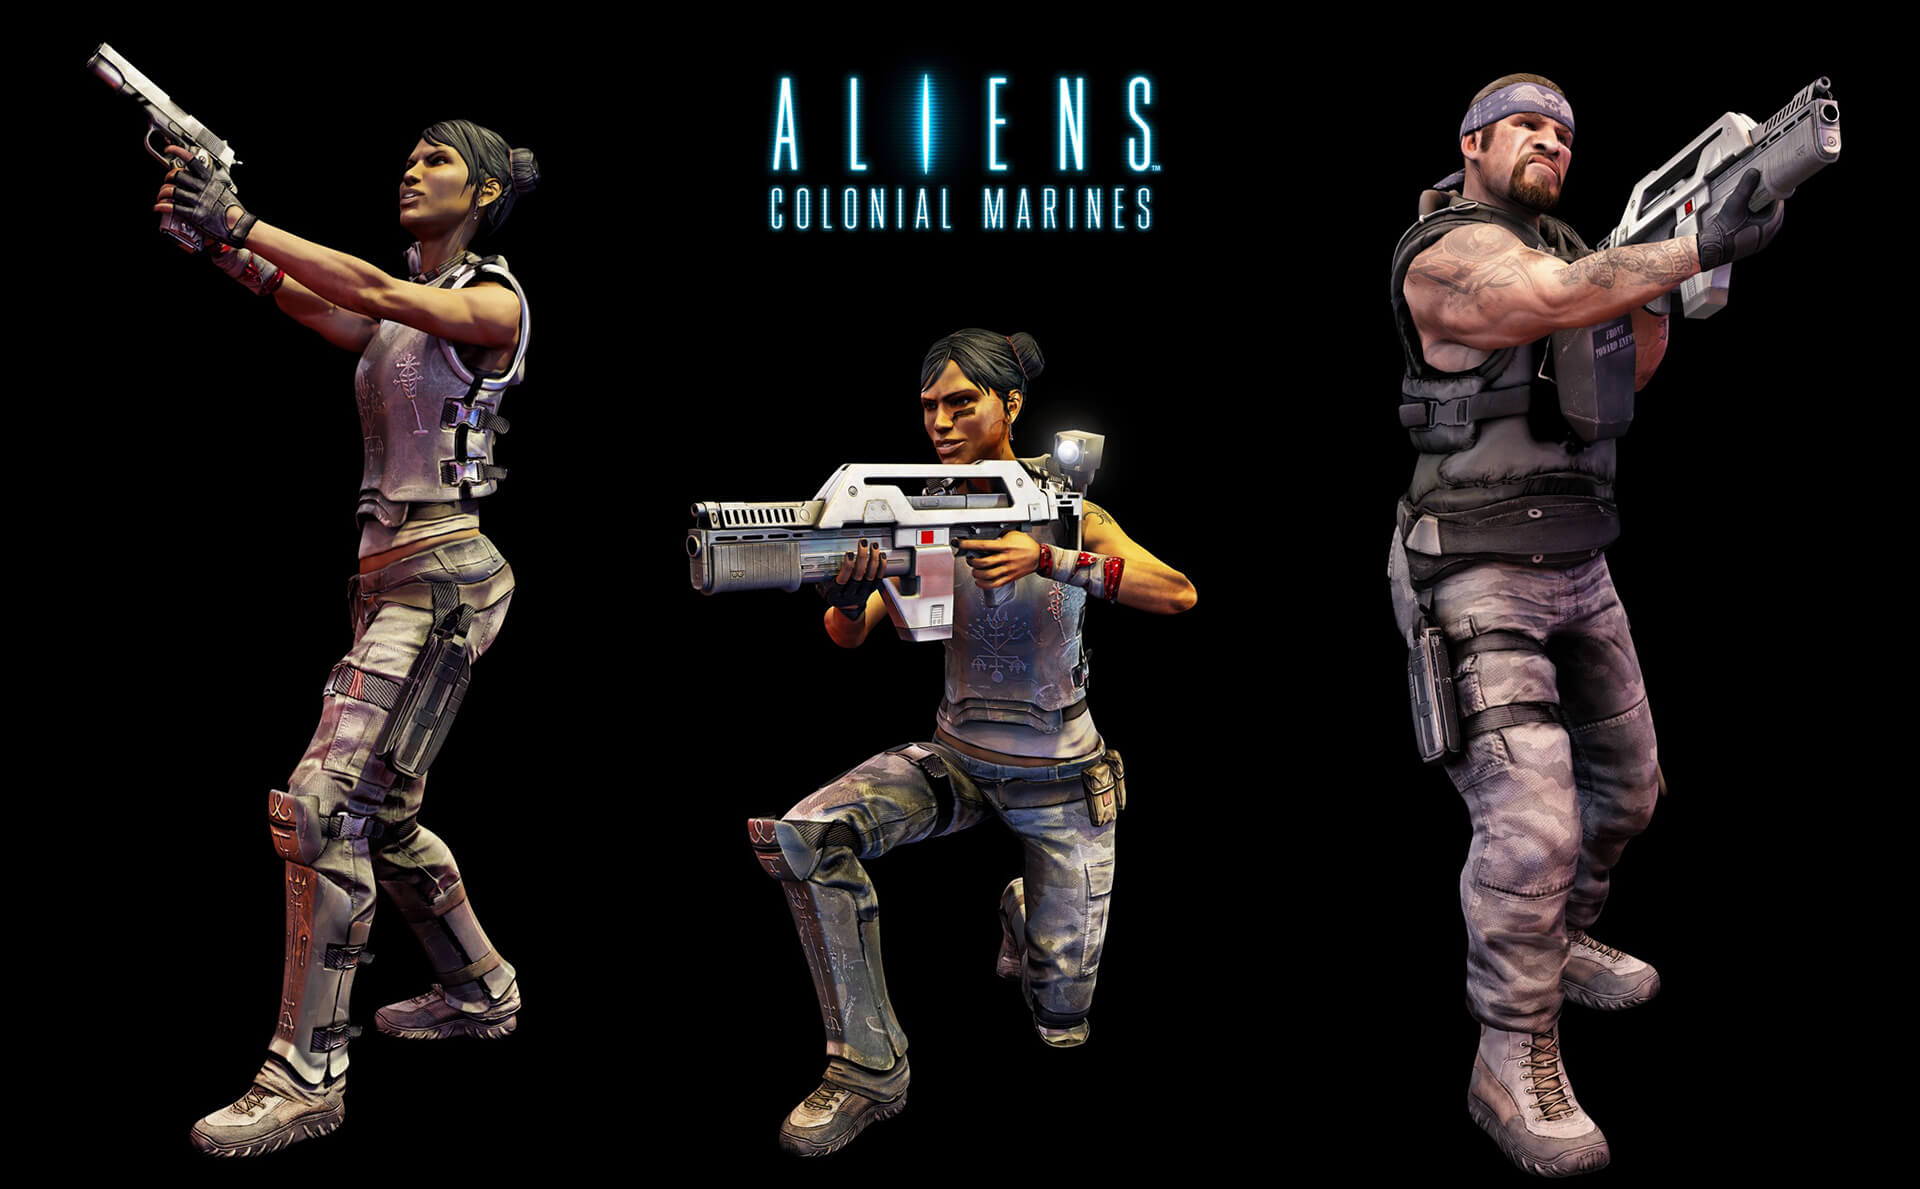 cg rendered model of the alien 3d character created for sega to be used on game packaging for alien colonial marines